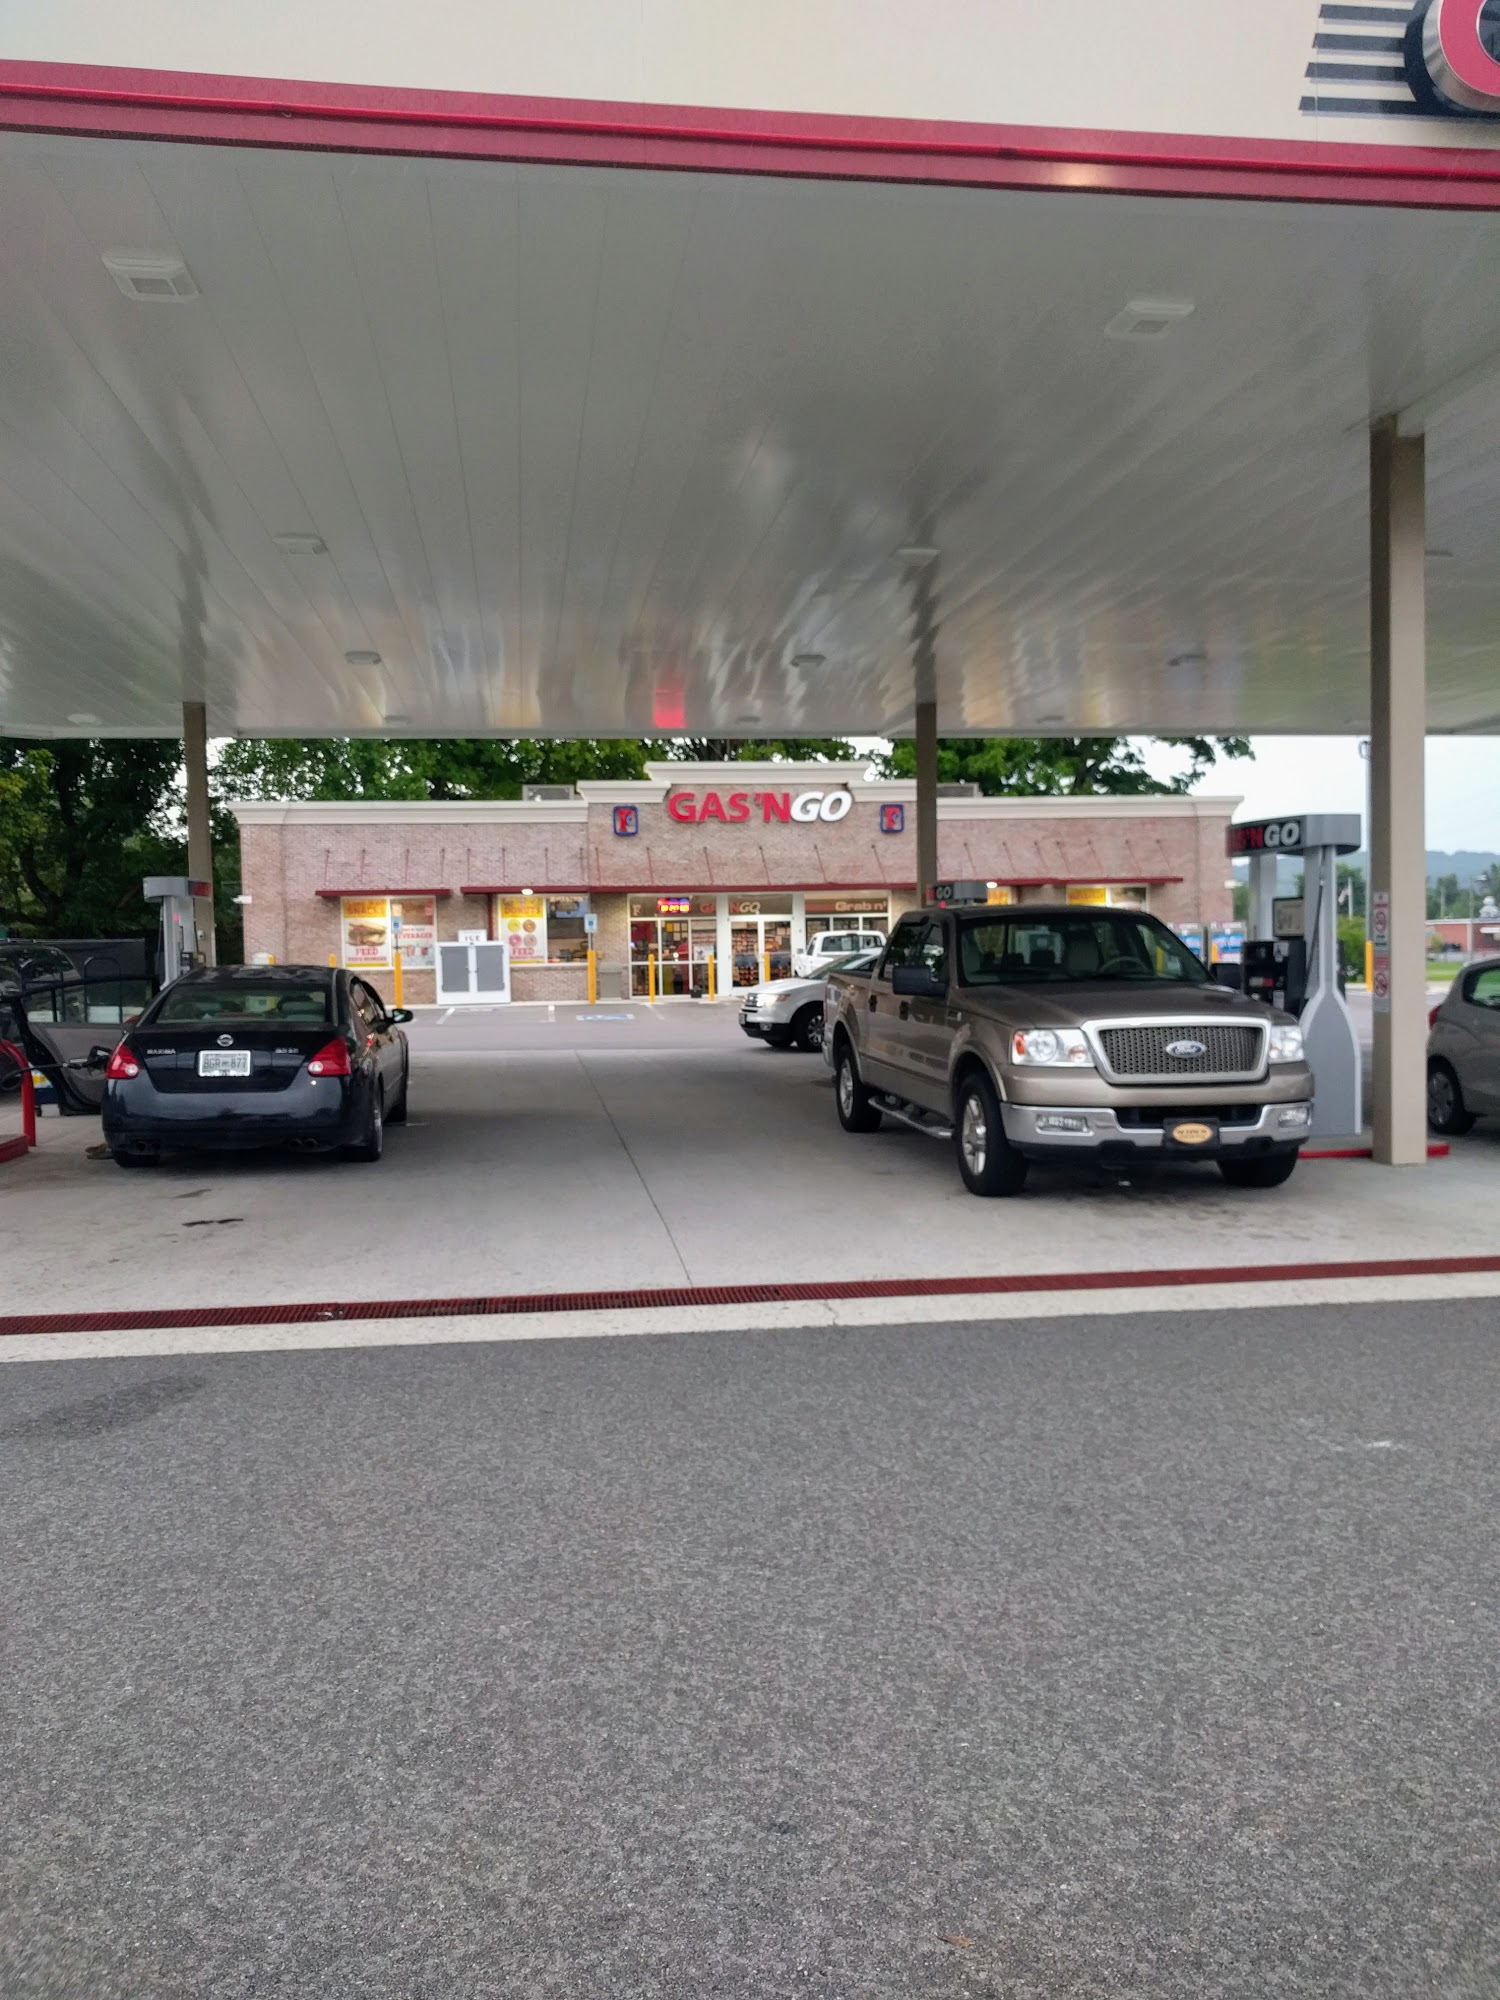 Food City Gas 'N Go Convenience Store